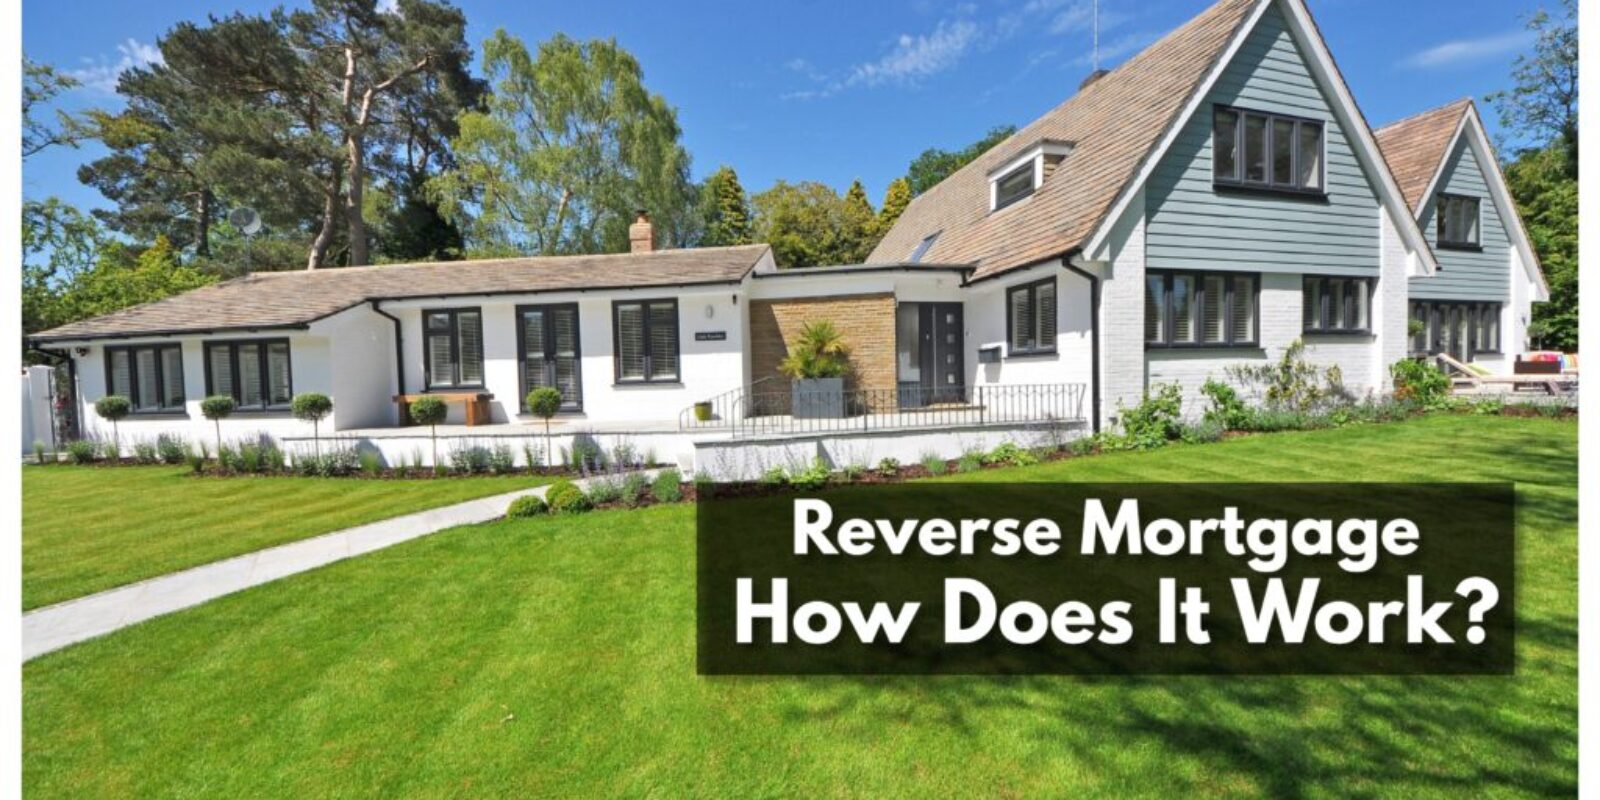 Reverse mortgage is a way to access home equity while still living in your home